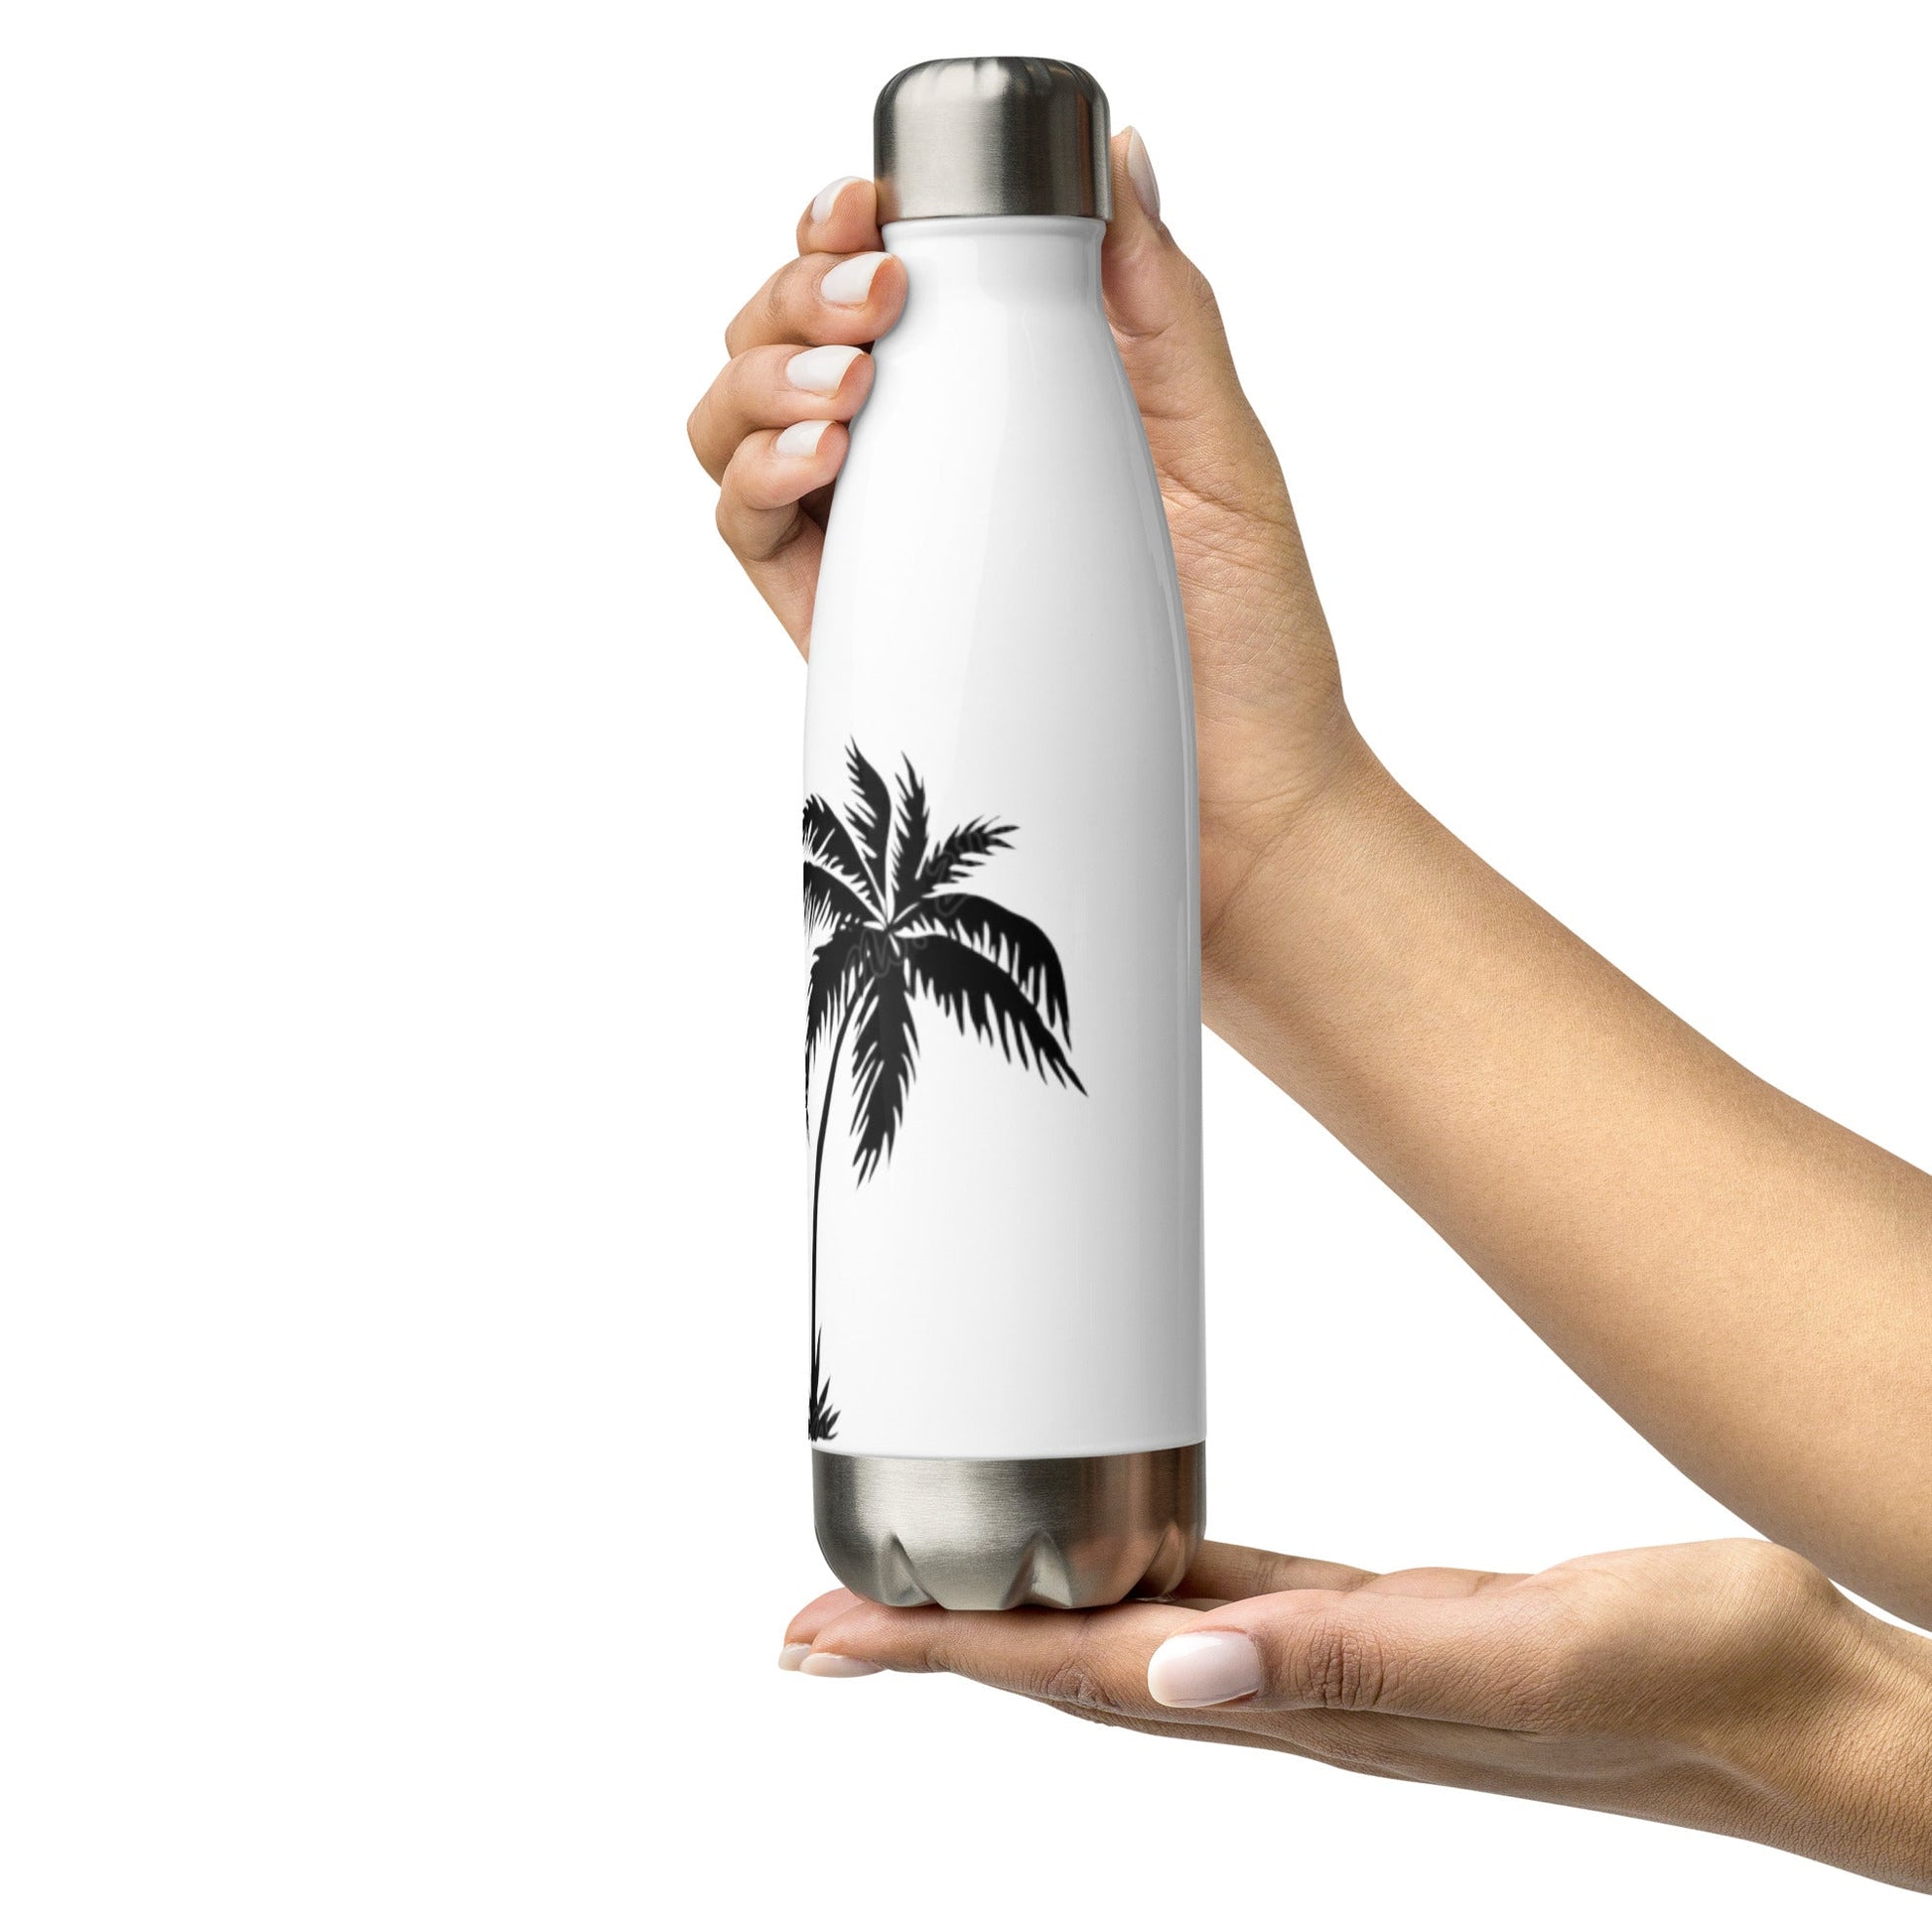 Sunzout Palm tree Stainless Steel Water Bottle - Sunzout Outdoor Spaces LLC